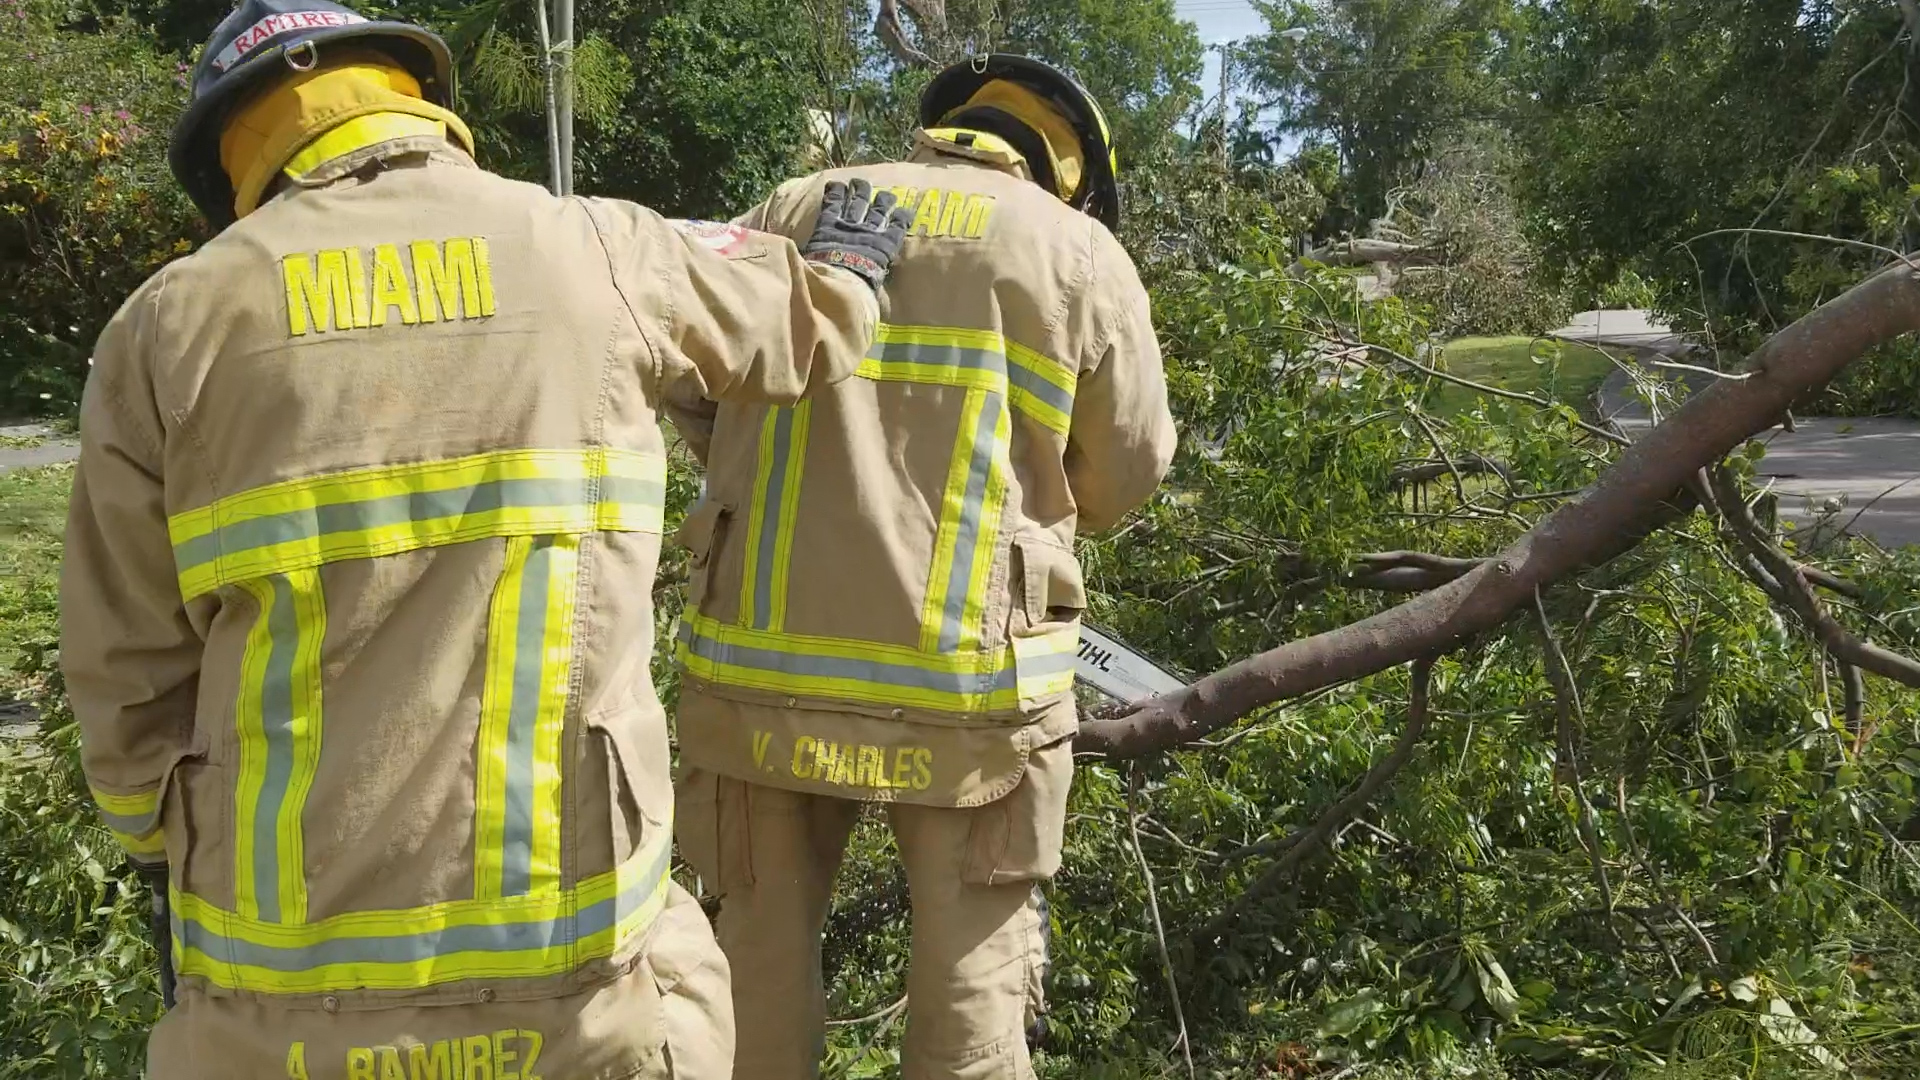 Miami Firefighters cut teams clear debris and downed trees post Hurricane in order to restore traffic flow. 